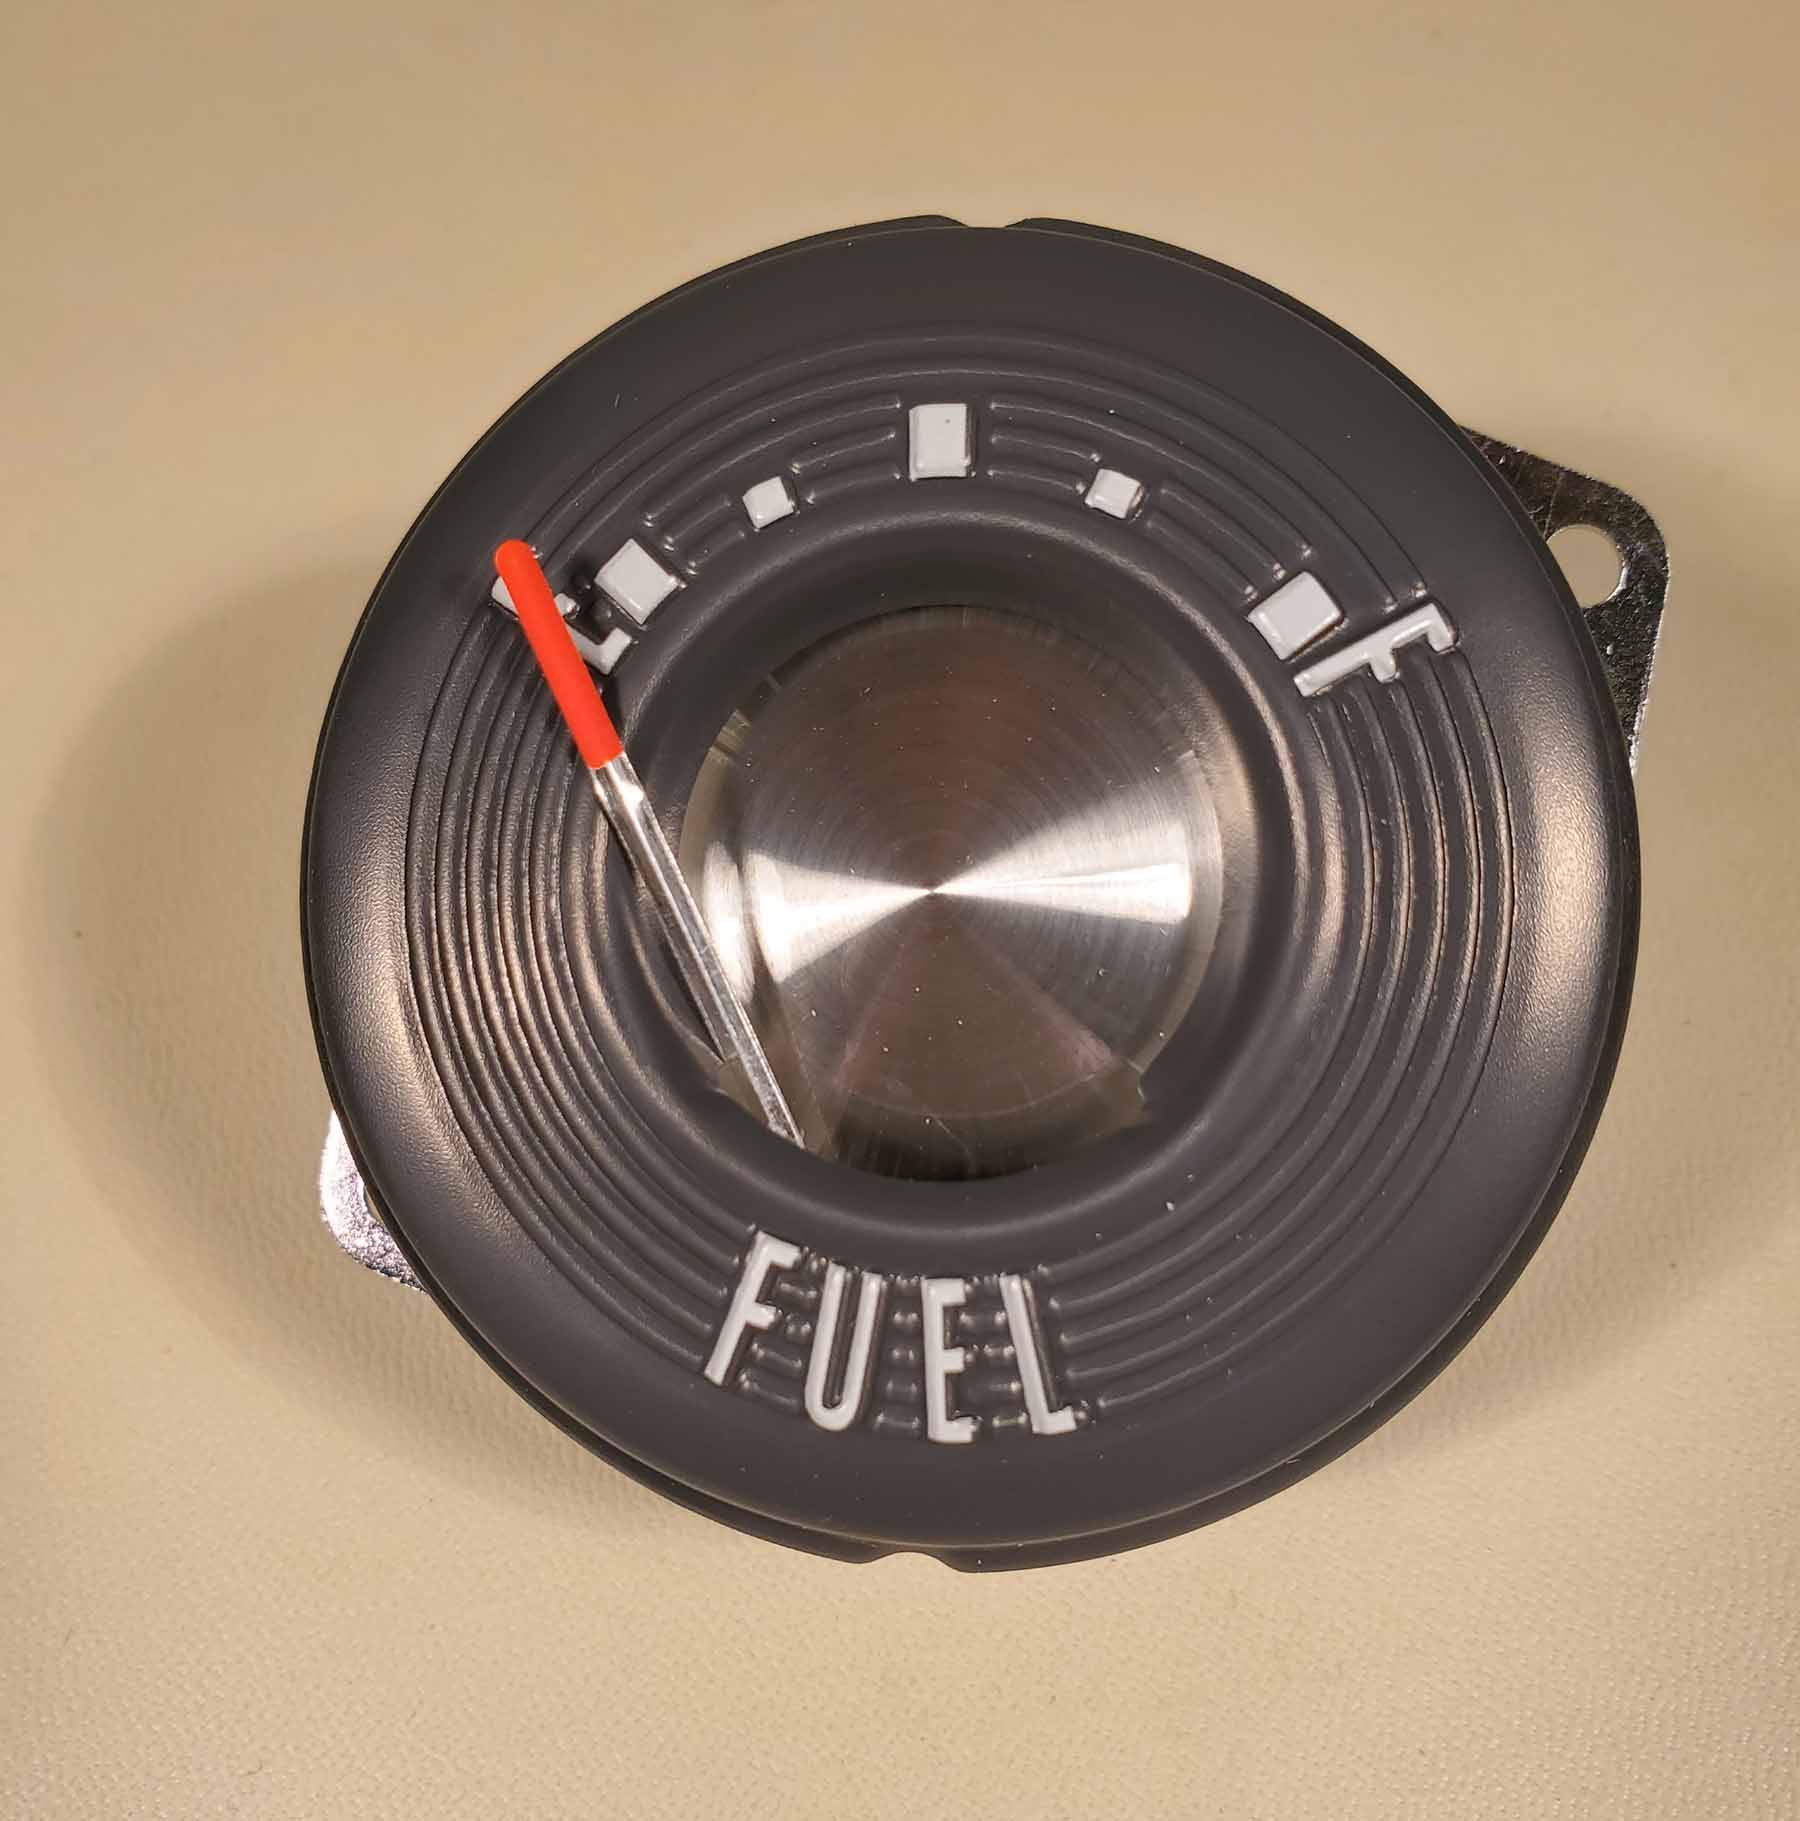 T 9305C Fuel Gauge for 1957 Ford Thunderbird (T9305C)